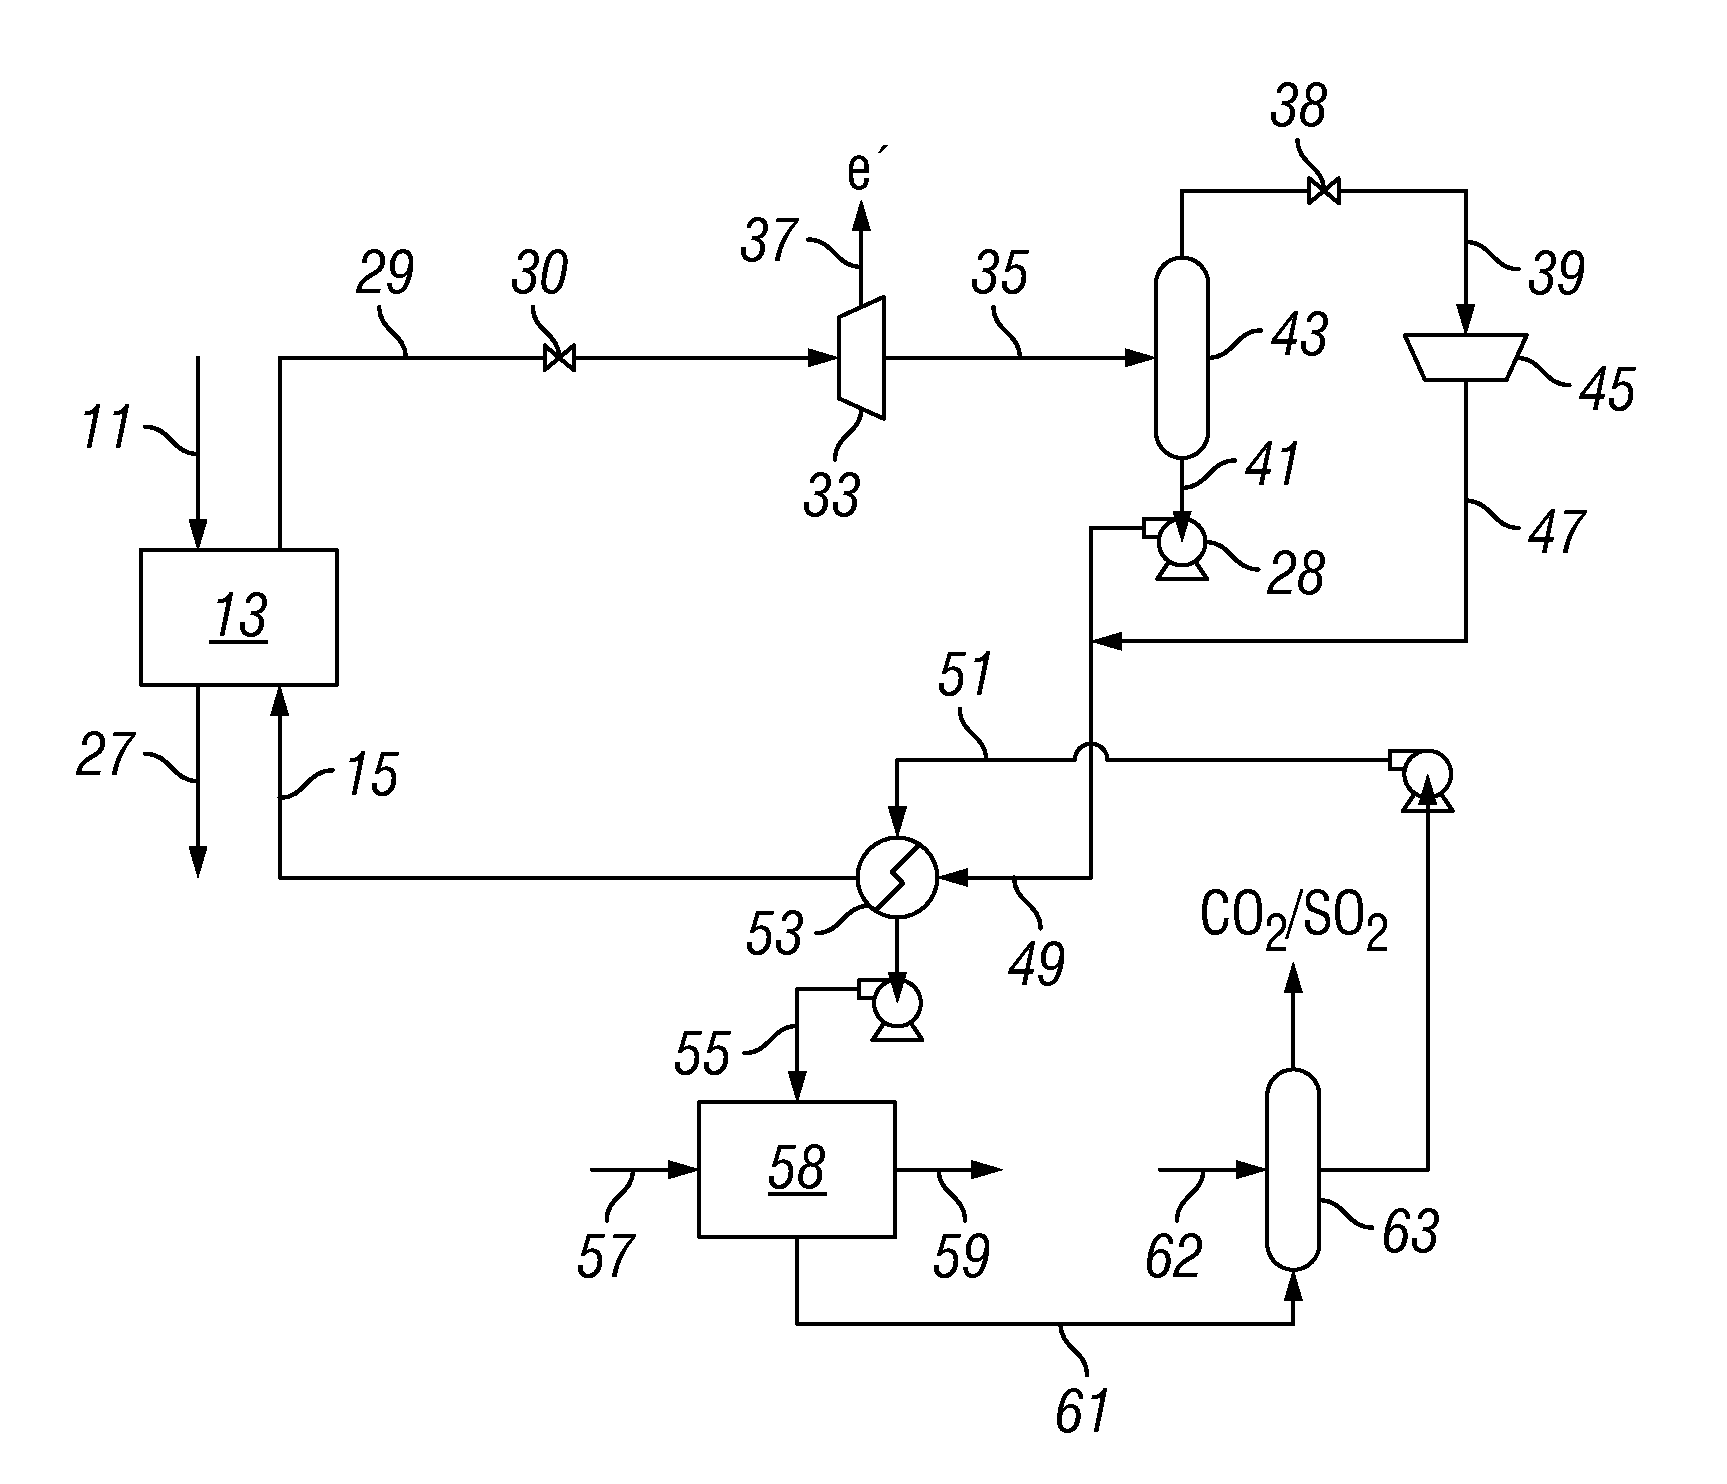 System and process for generation of electrical power